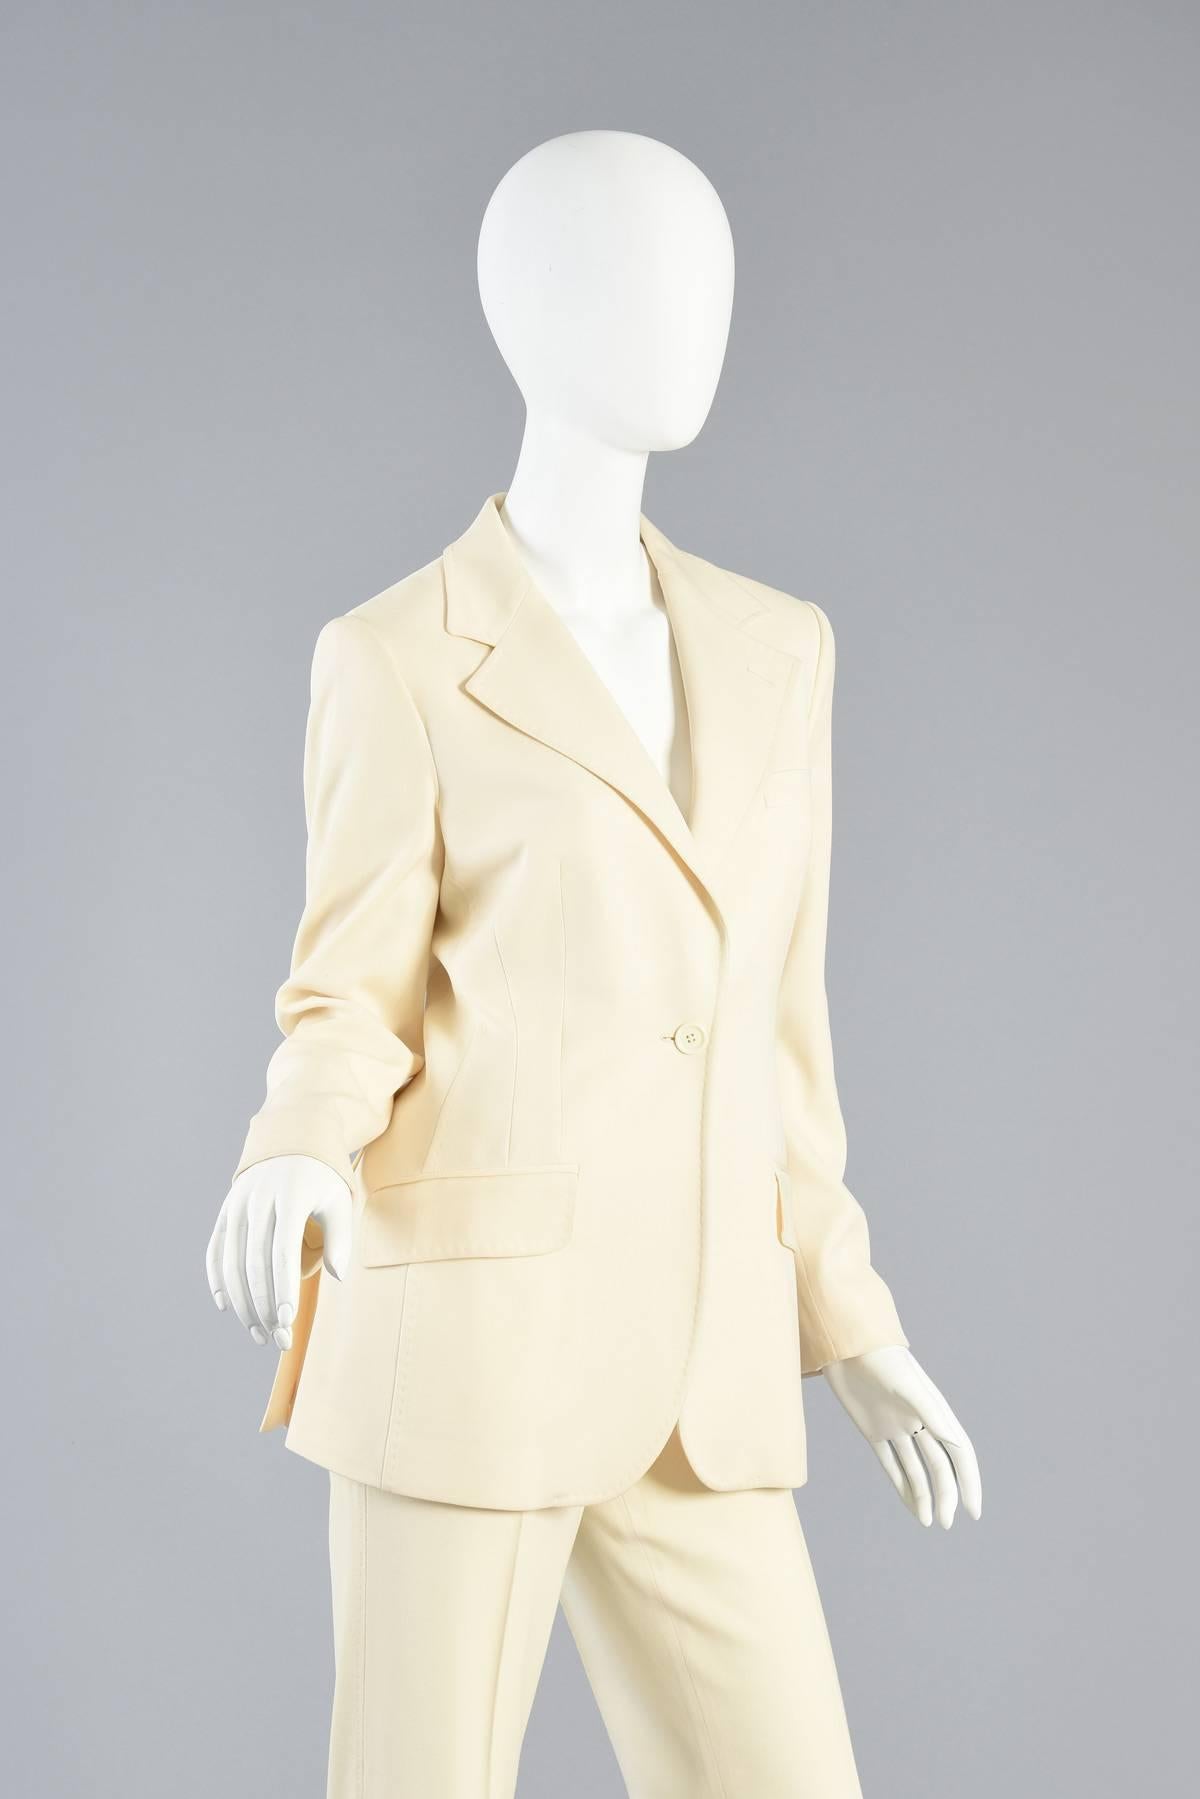 Dolce & Gabbana Ivory Tuxedo Suit For Sale 2